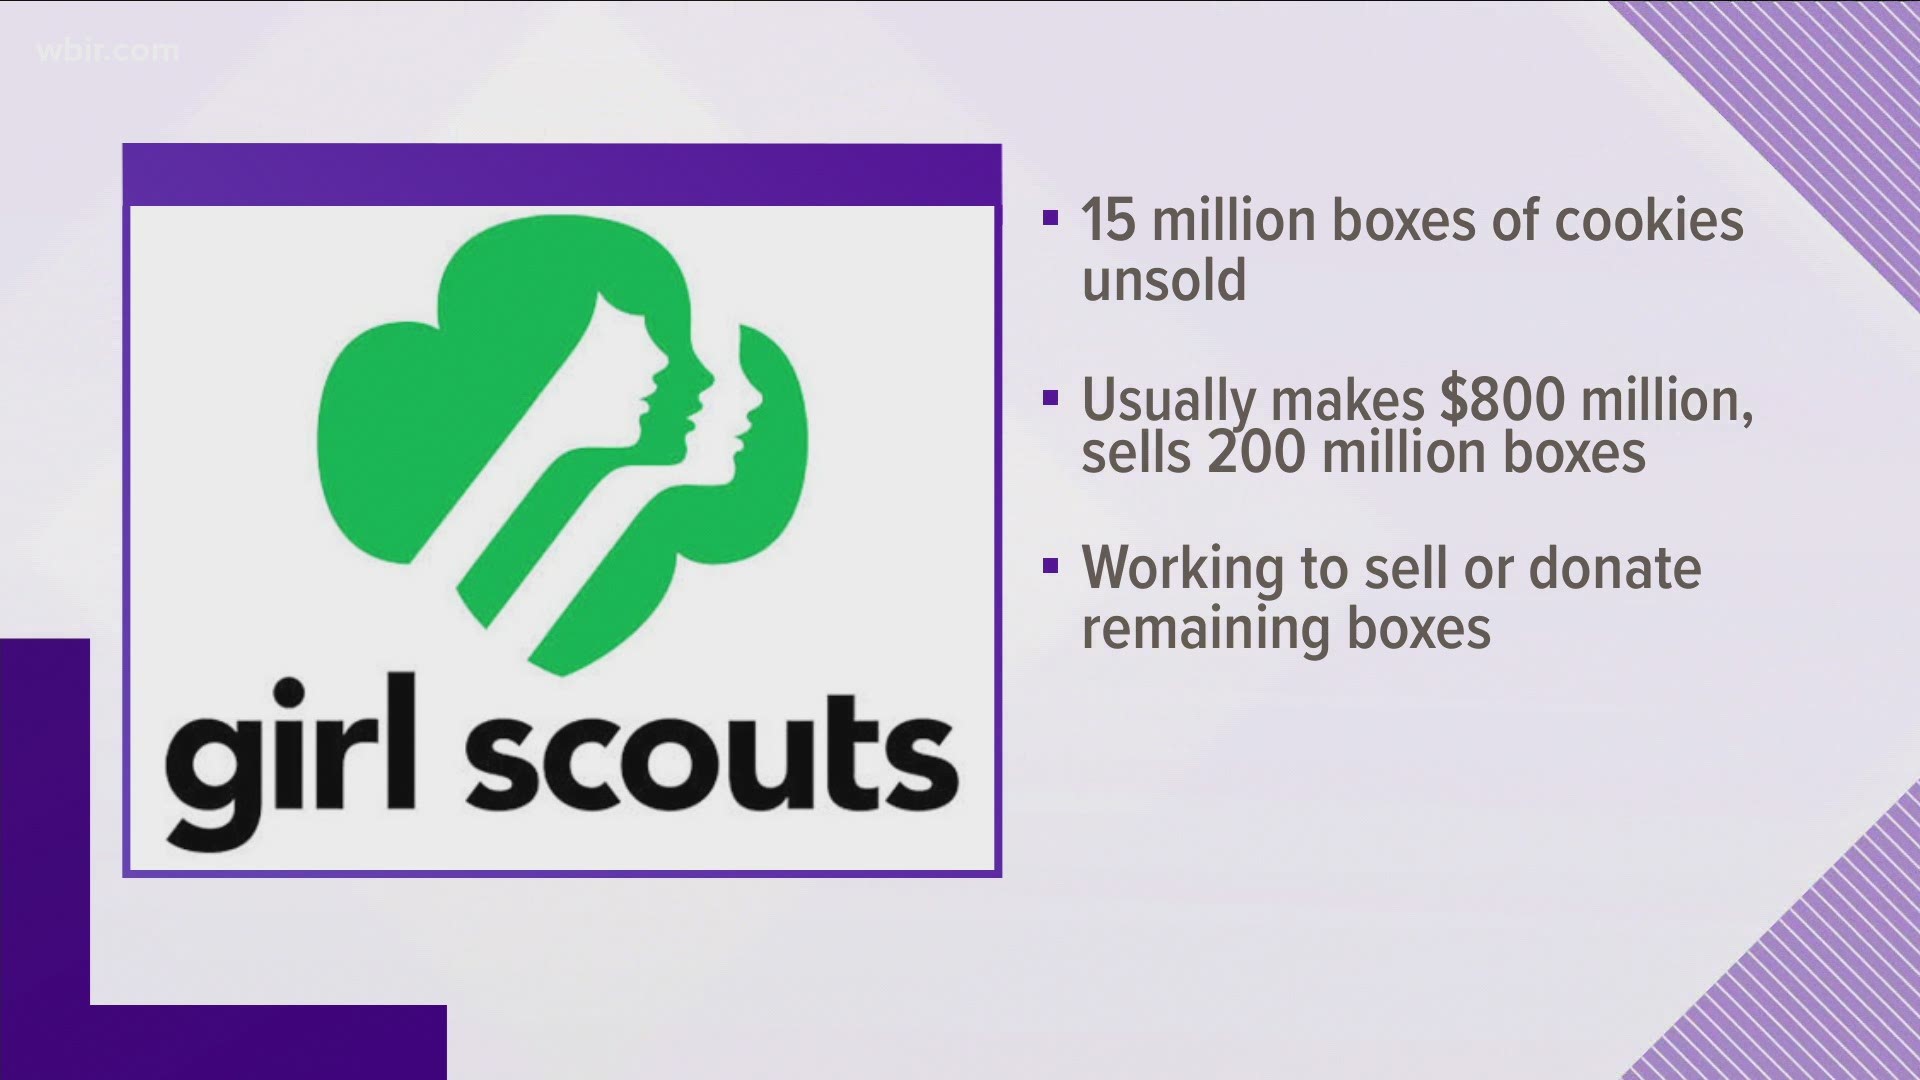 15 million boxes of Girl Scouts cookies are unsold.